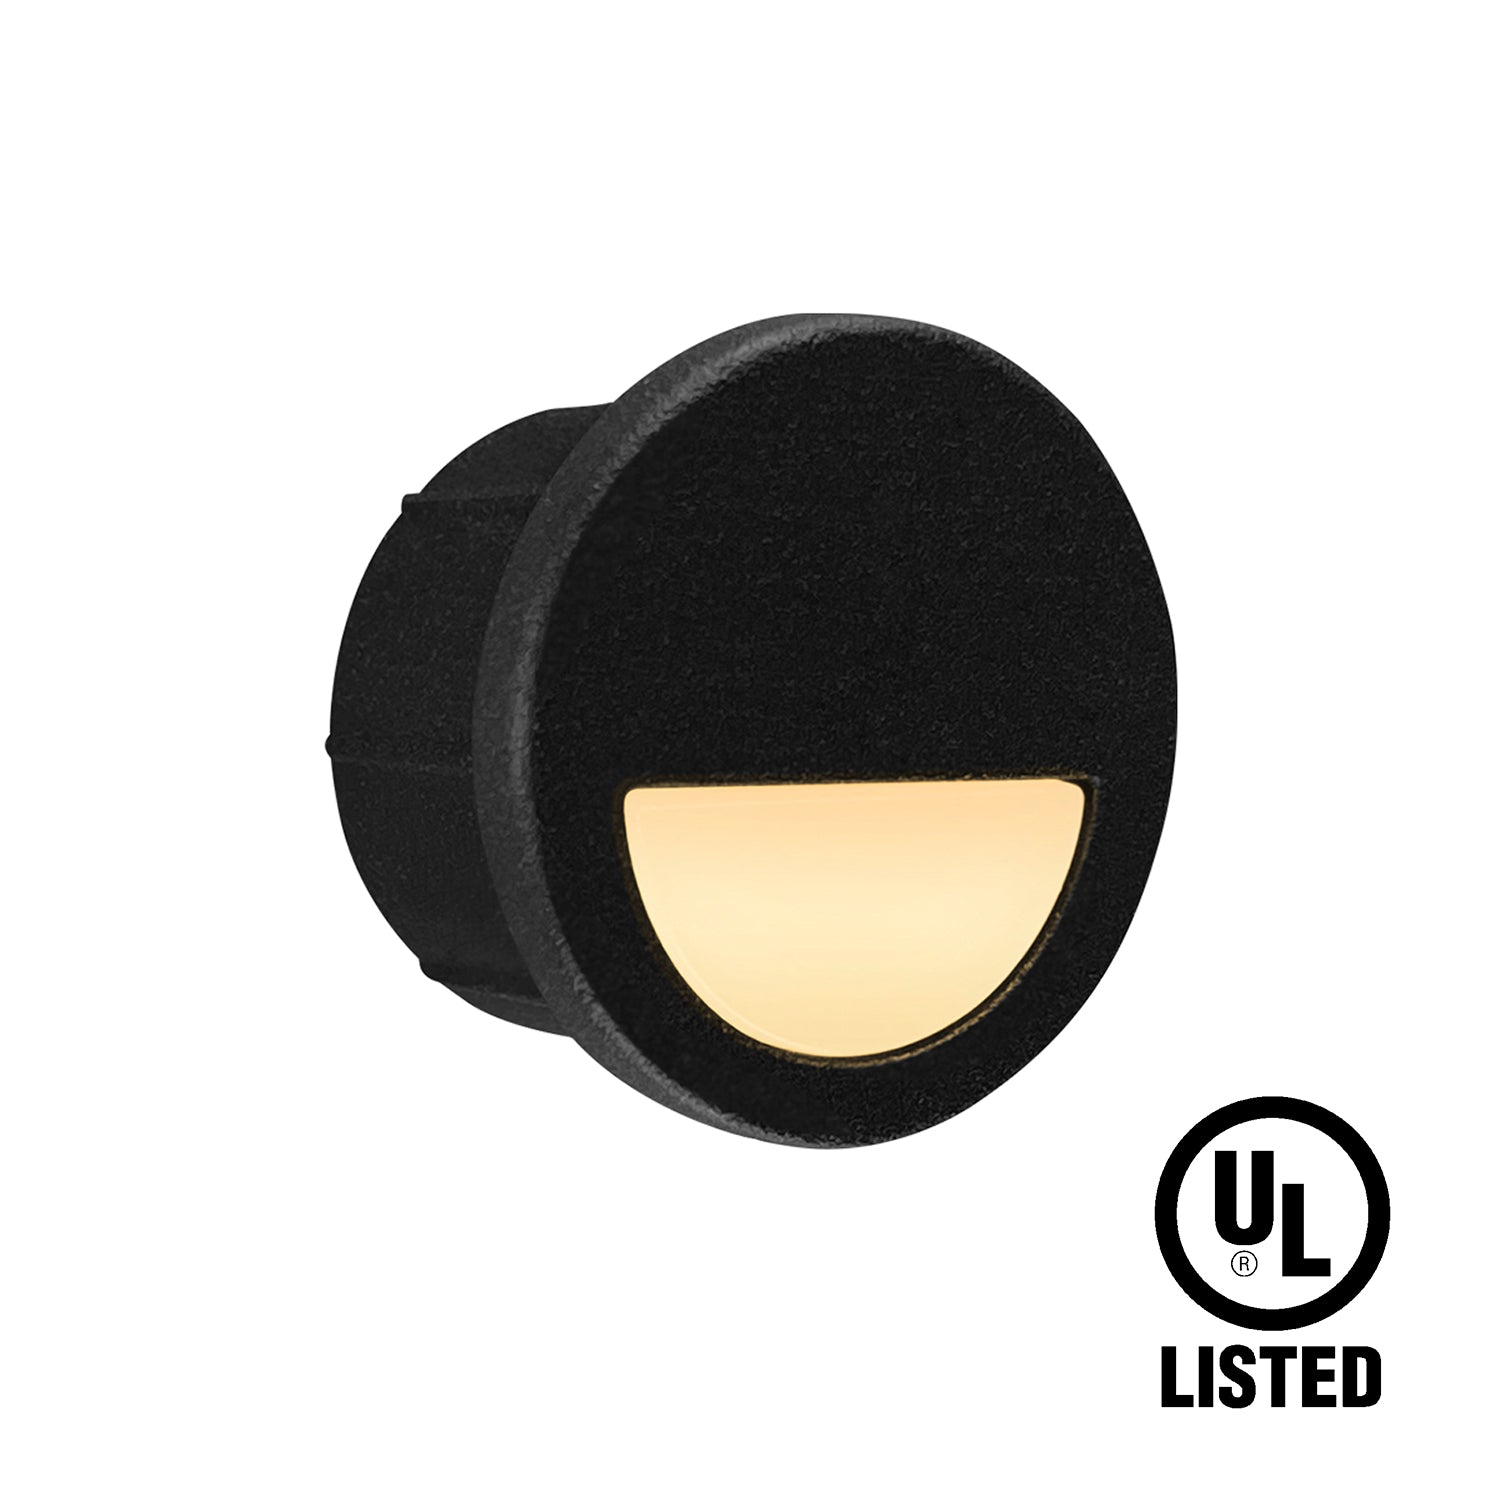 Low Voltage Recessed Mini Size Eyelid Step Light with Integrated LED Chips, 1W, 12V AC/DC, Black, Φ1", 3000K